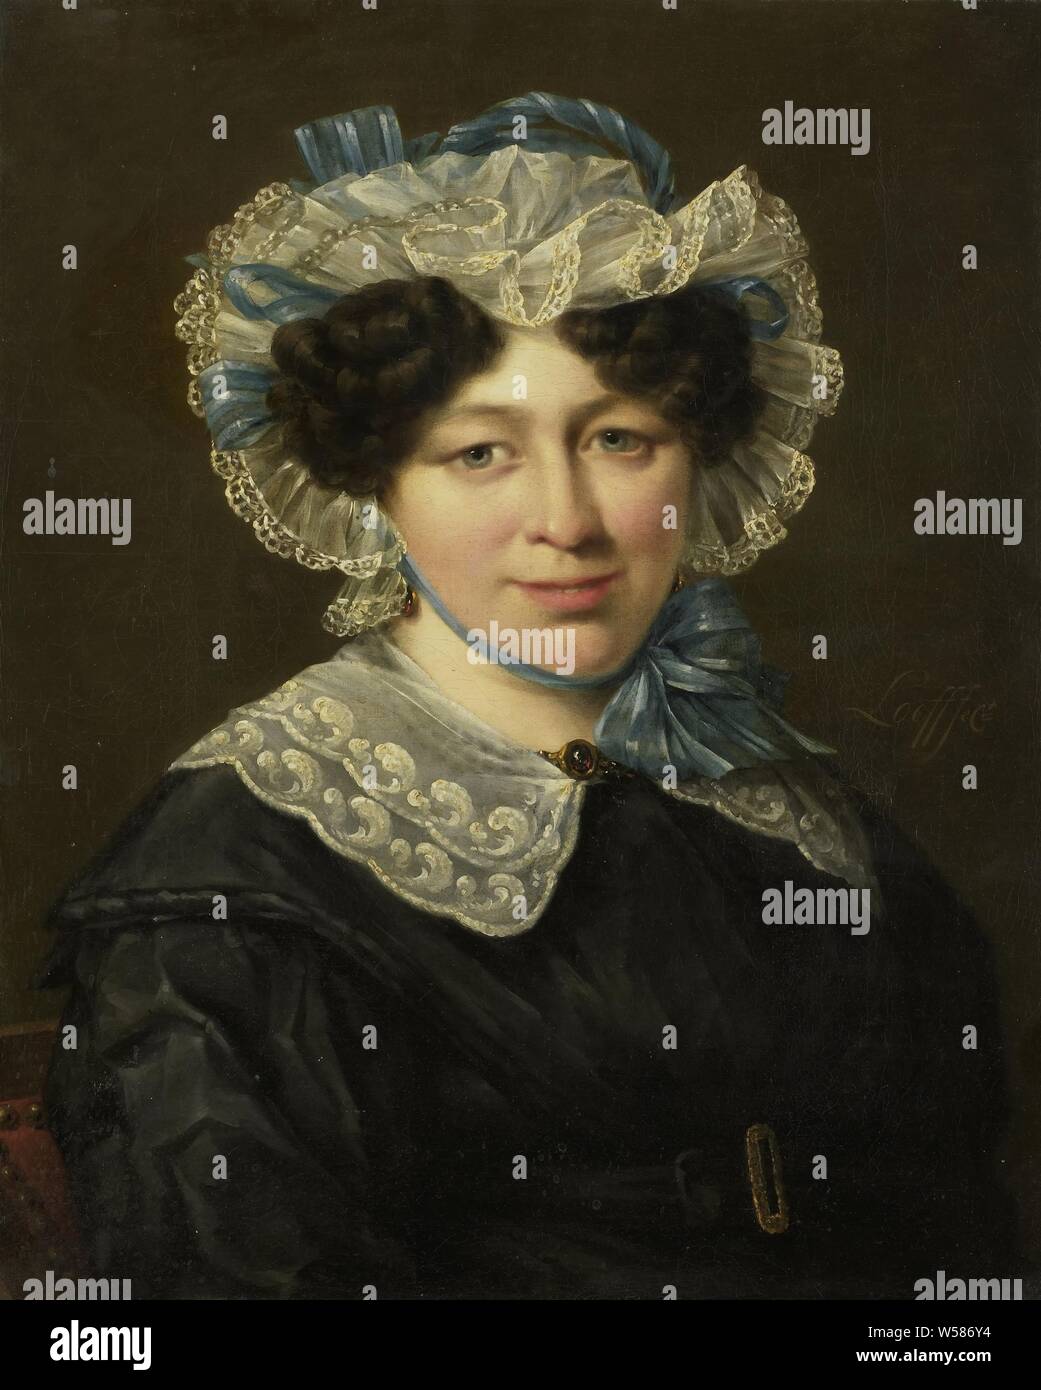 Portrait of Maria Adriana van der Sluys, Wife of Hermanus Martinus Eekhout, the wife of Hermanus Martinus Eekhout. Bust, to the right, with a white lace cap on the head., Hillebrand Dirk Loeff, 1830 - 1838, canvas, oil paint (paint), h 61.7 cm × w 50.2 cm × t 3.8 cm d 9.1 cm Stock Photo